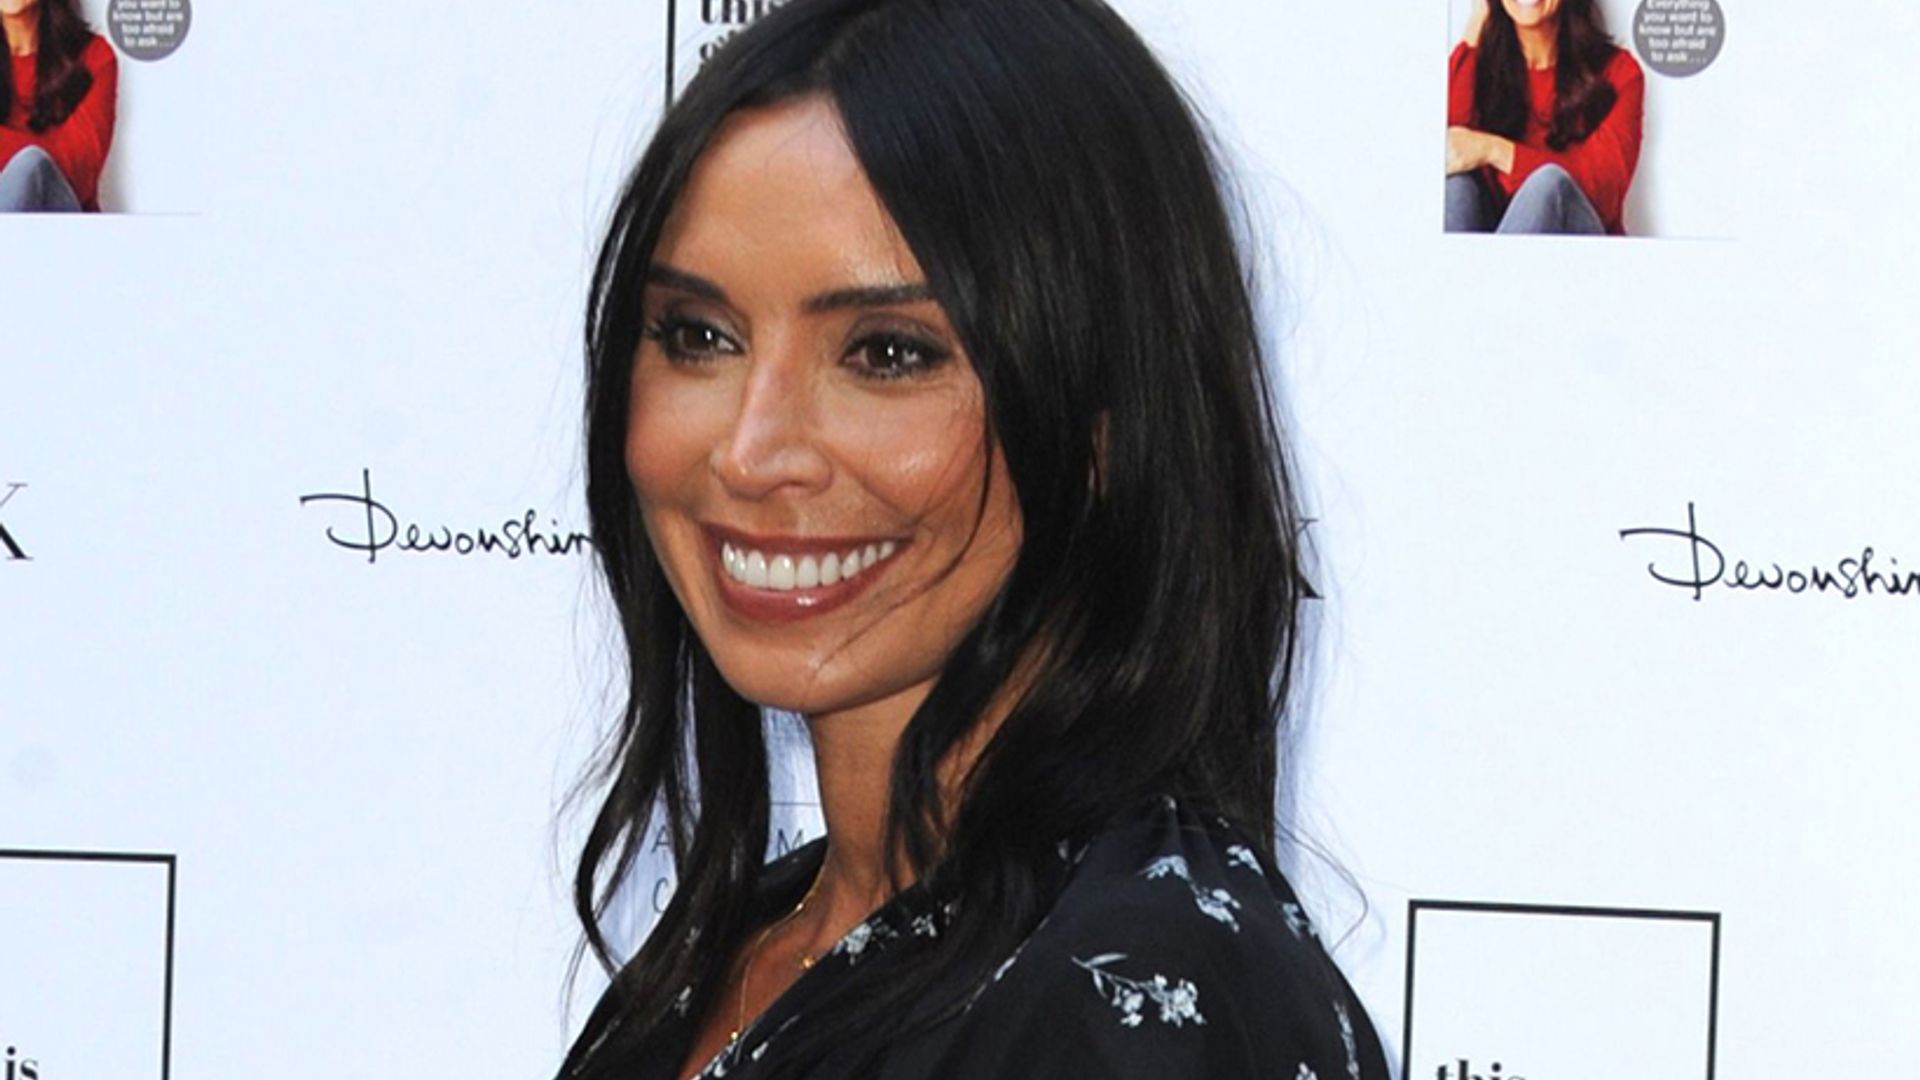 Pregnant Christine Bleakley shows off growing baby bump in floral dress ...